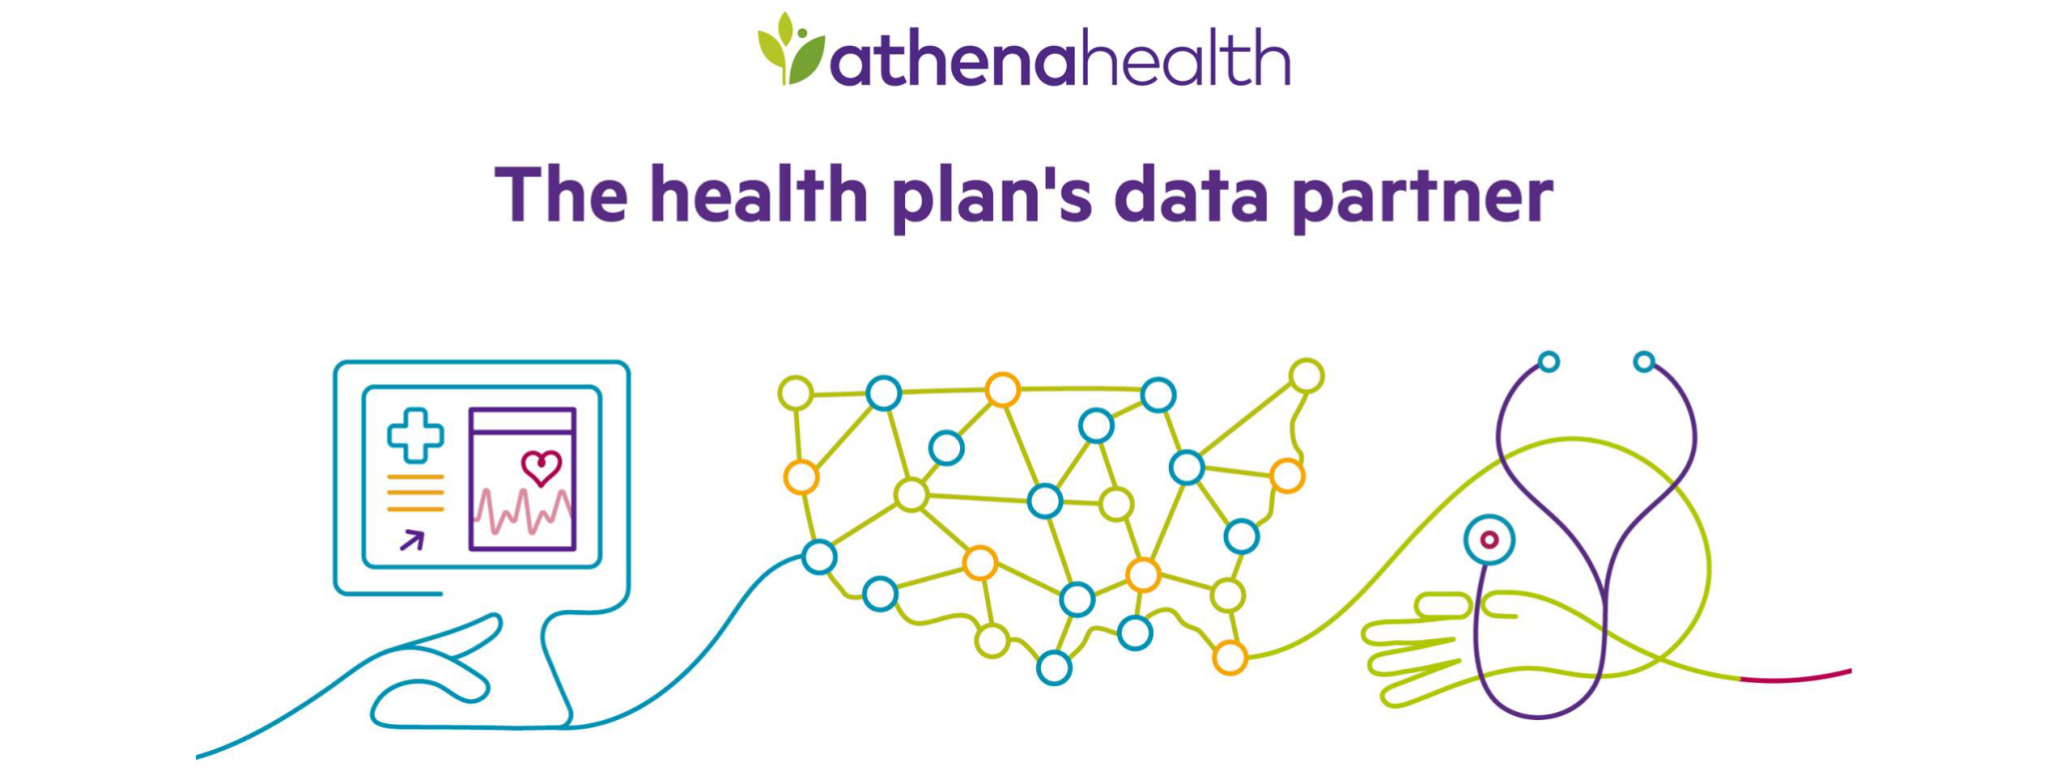 custom image of athena health plan- including an image of a computer, stethoscope and and interconnected US map indicating their connection